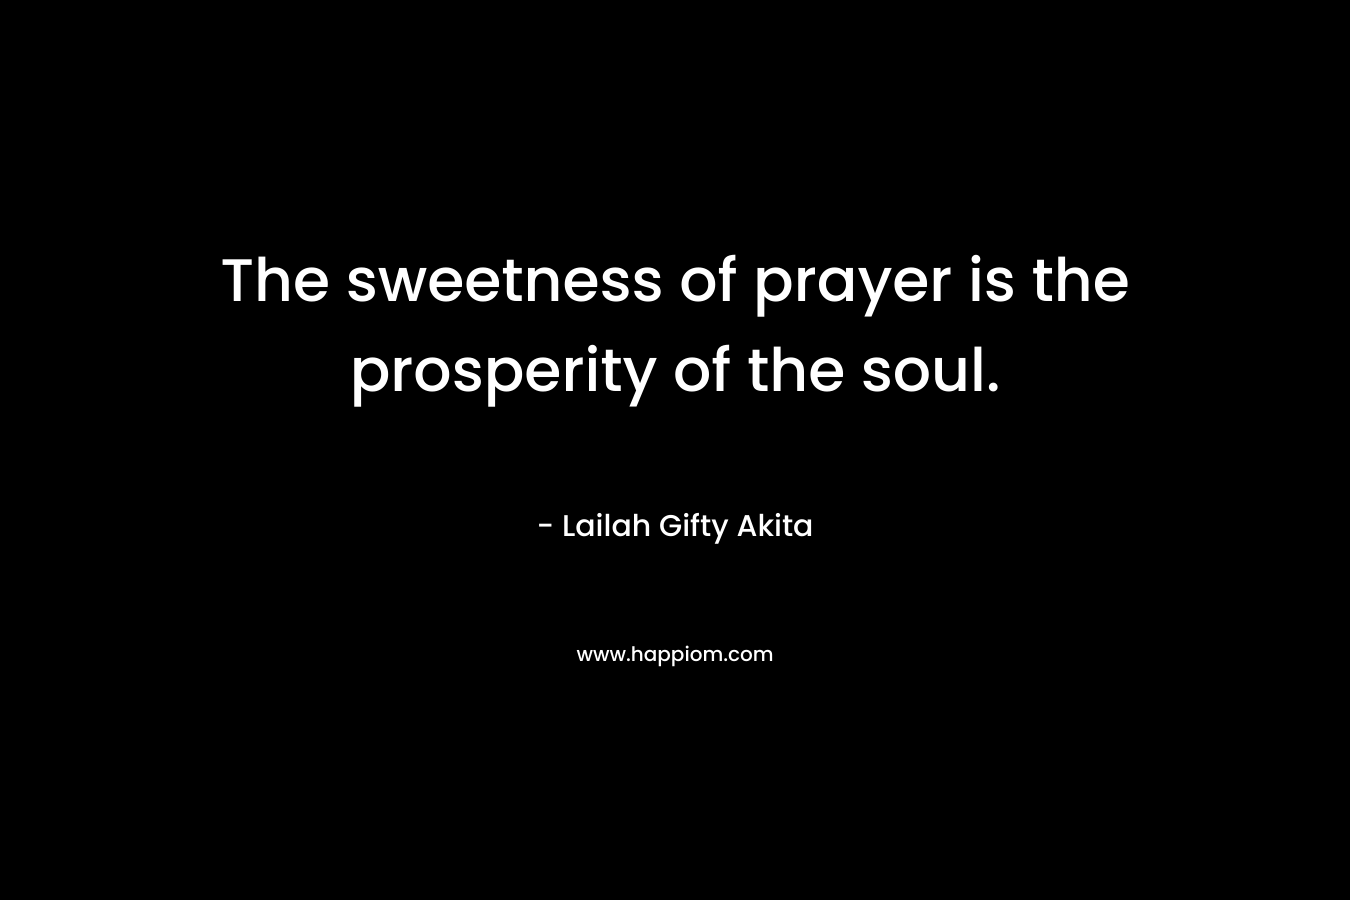 The sweetness of prayer is the prosperity of the soul.